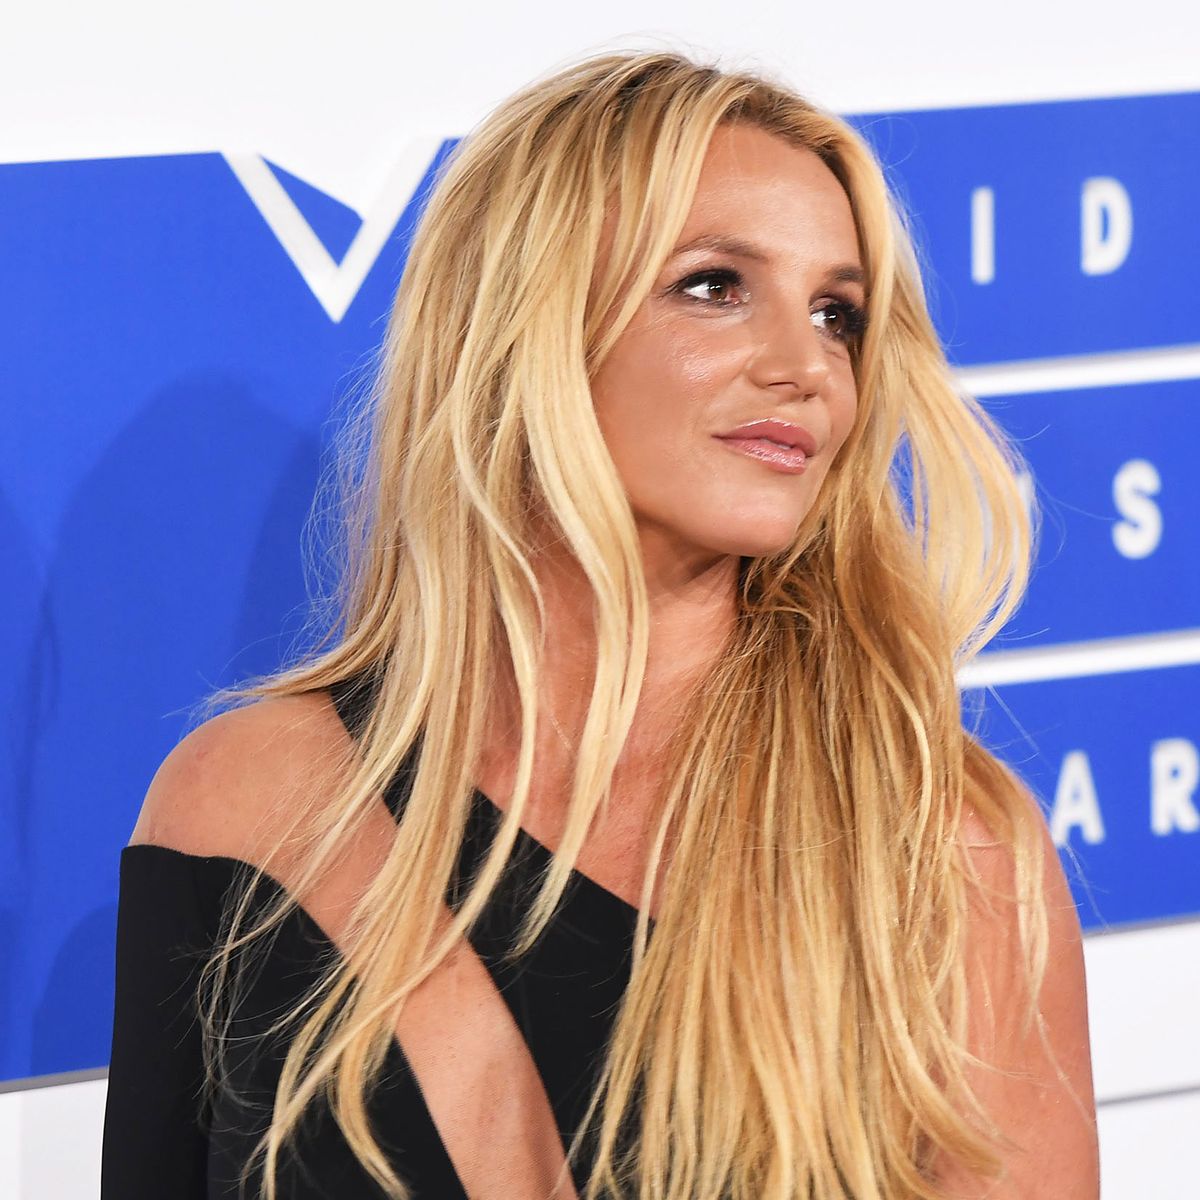 Britney Spears is finally released from her guardianship